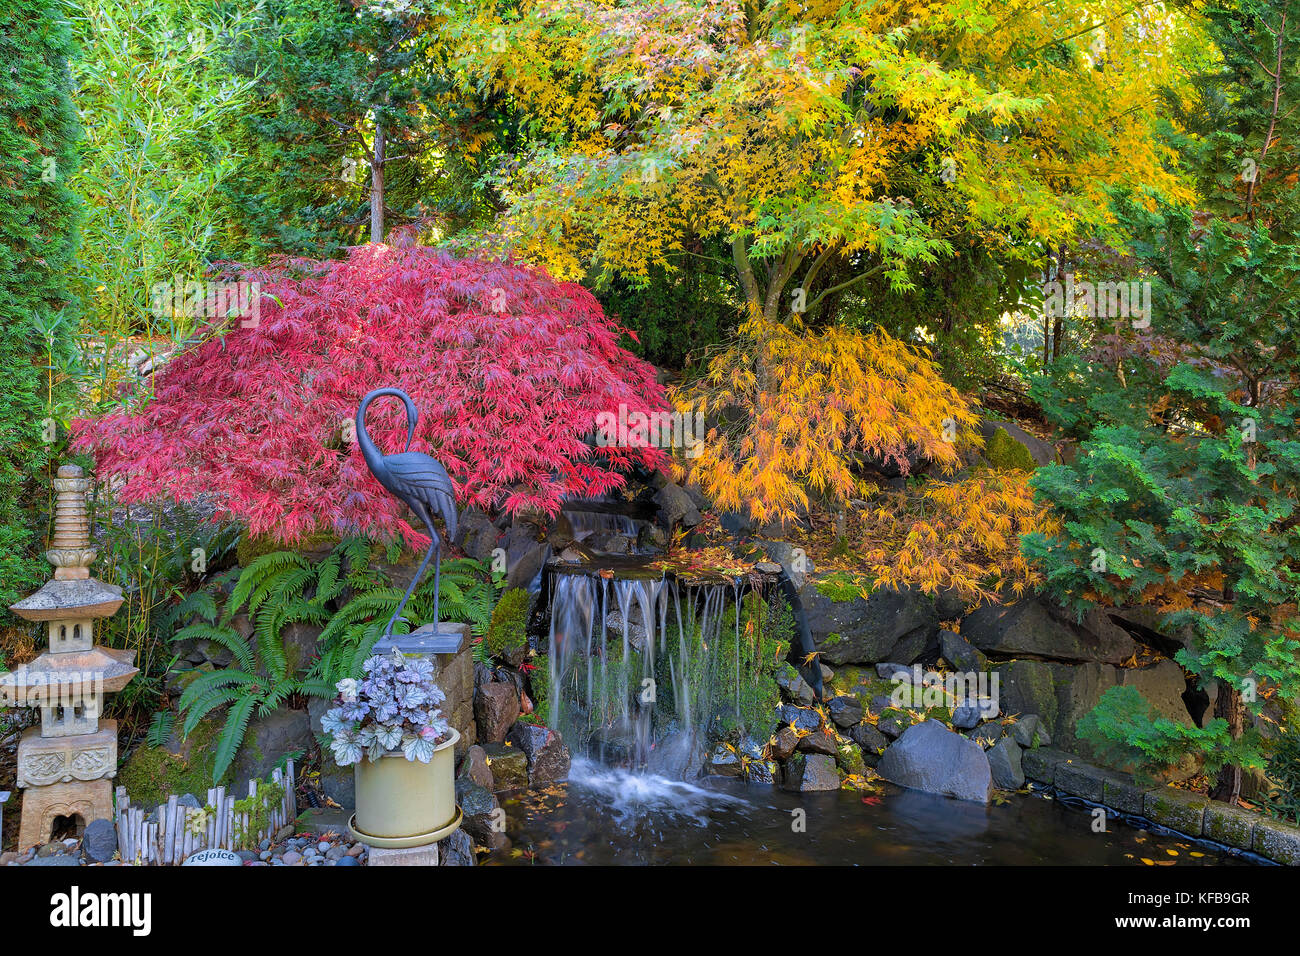 Home garden backyard waterfall pond with maple trees bamboo decor in fall season color Stock Photo